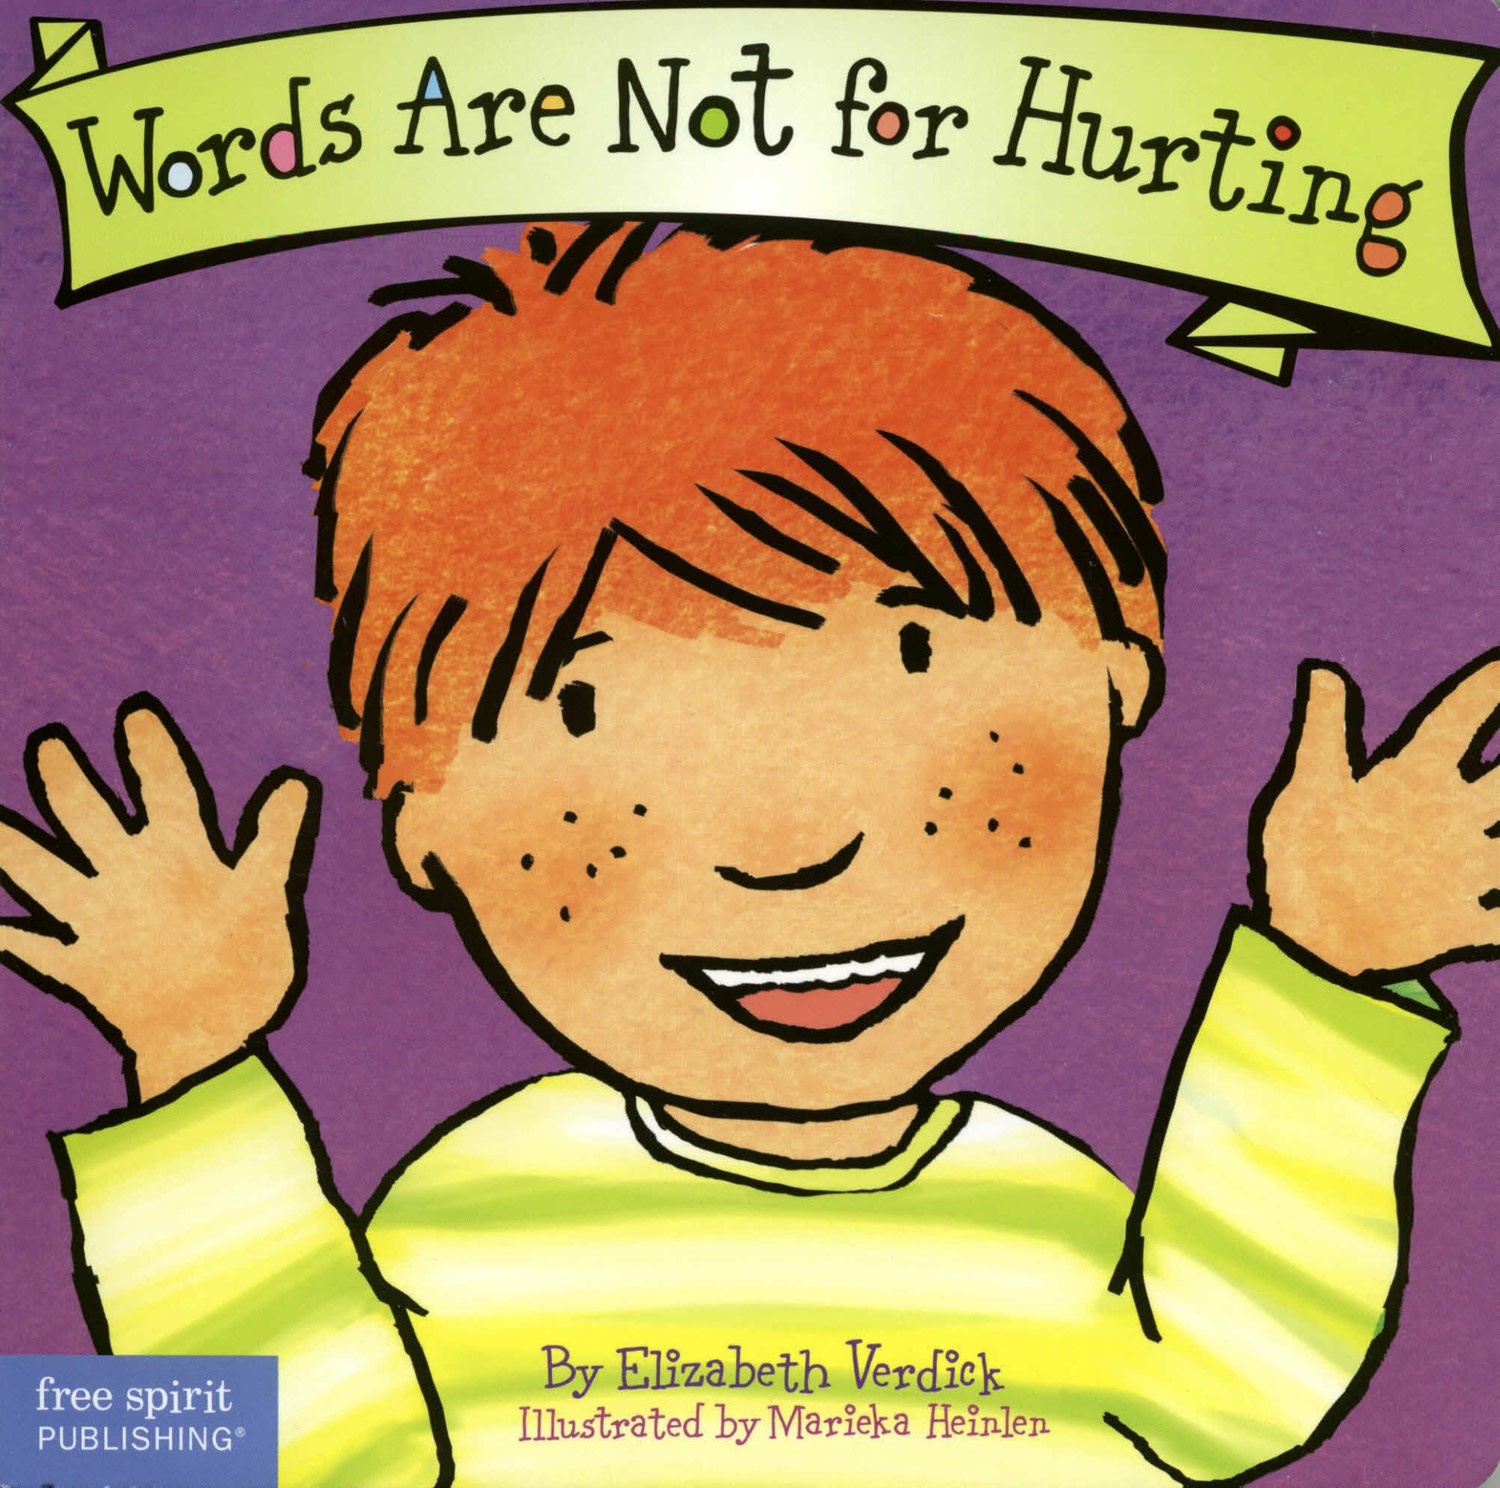 Words Are Not for Hurting (BD) Words Are Not for Hurting (BD)